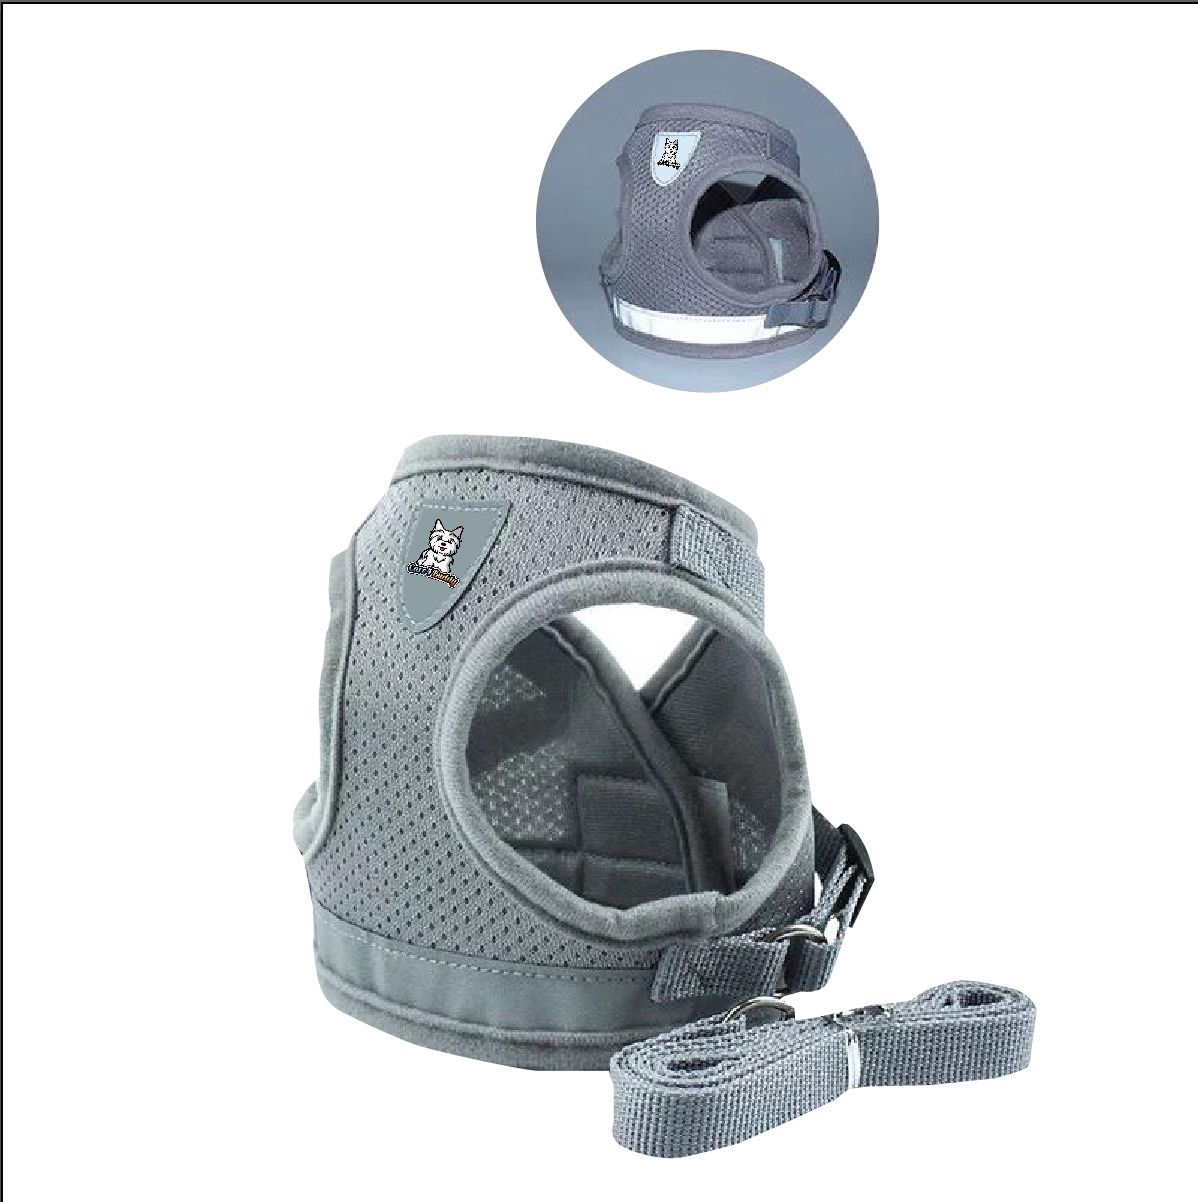 Pet Reflective Harness Adjustable Soft and Comfortable For Your Dog and Cat   